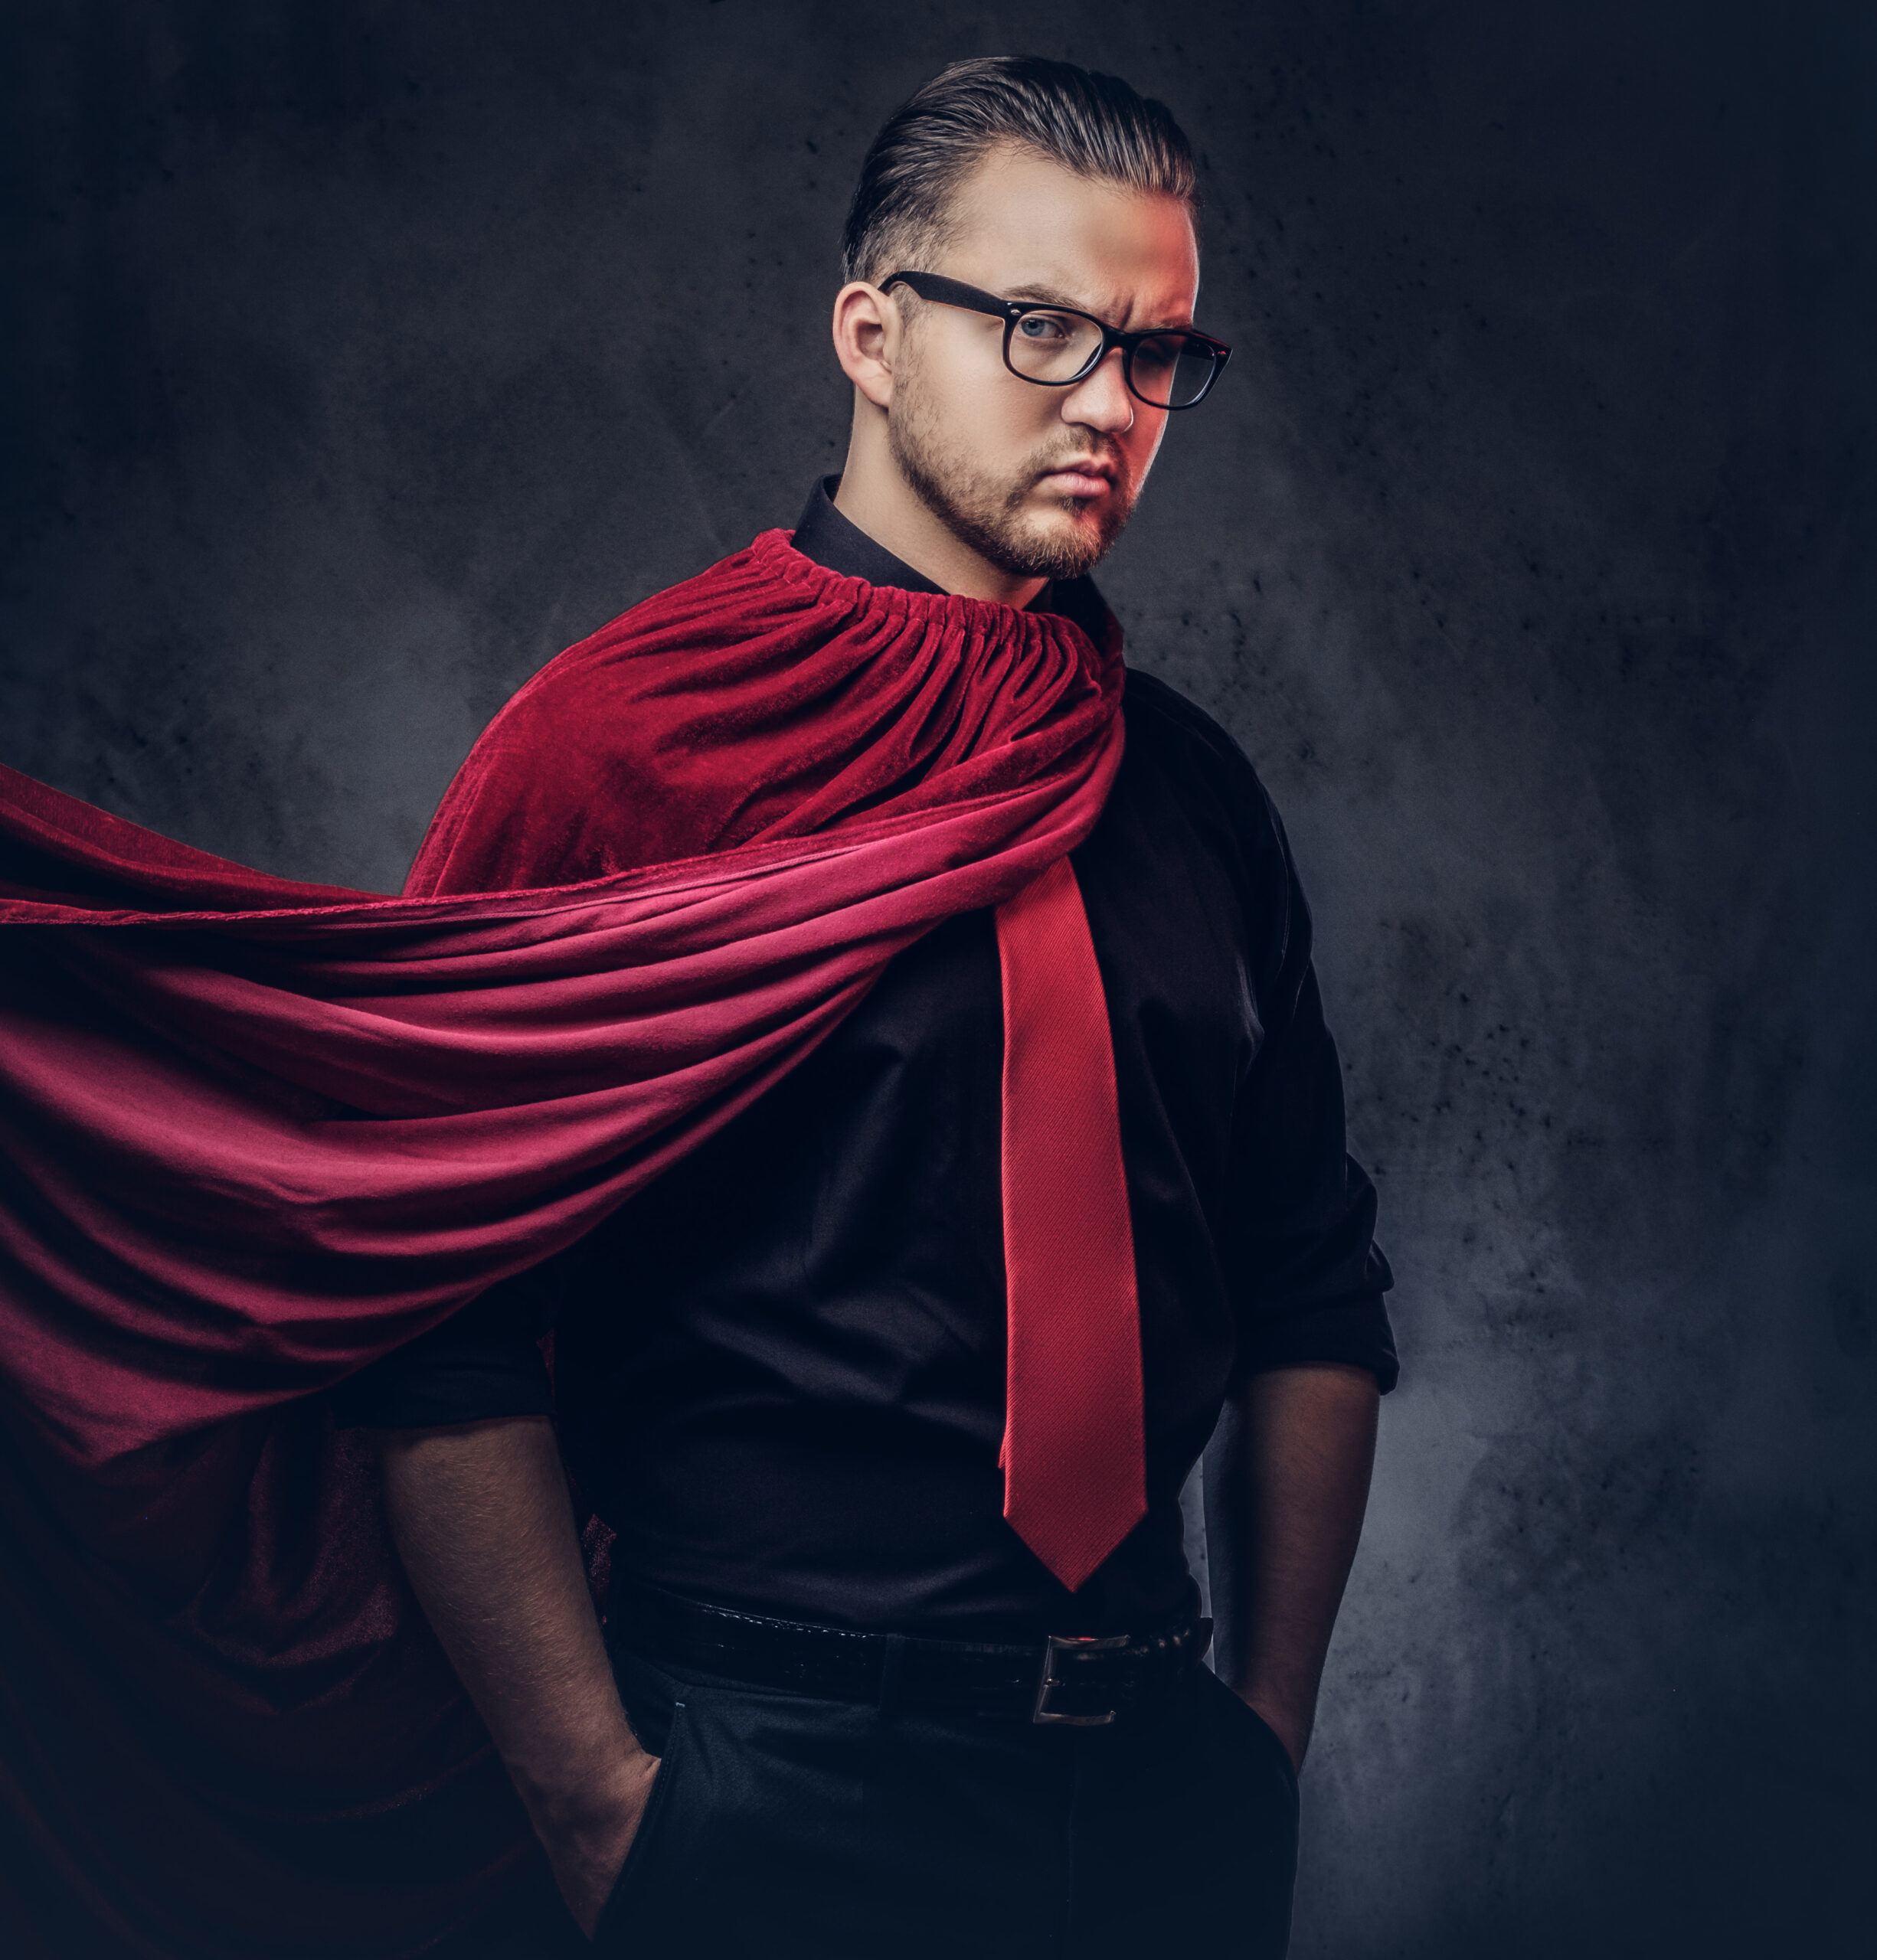 Гениальный парень. Stock photo of man with Red Tie and Black Shirt with Glasses. Stock photo of man with Red Tie and Black Shirt.